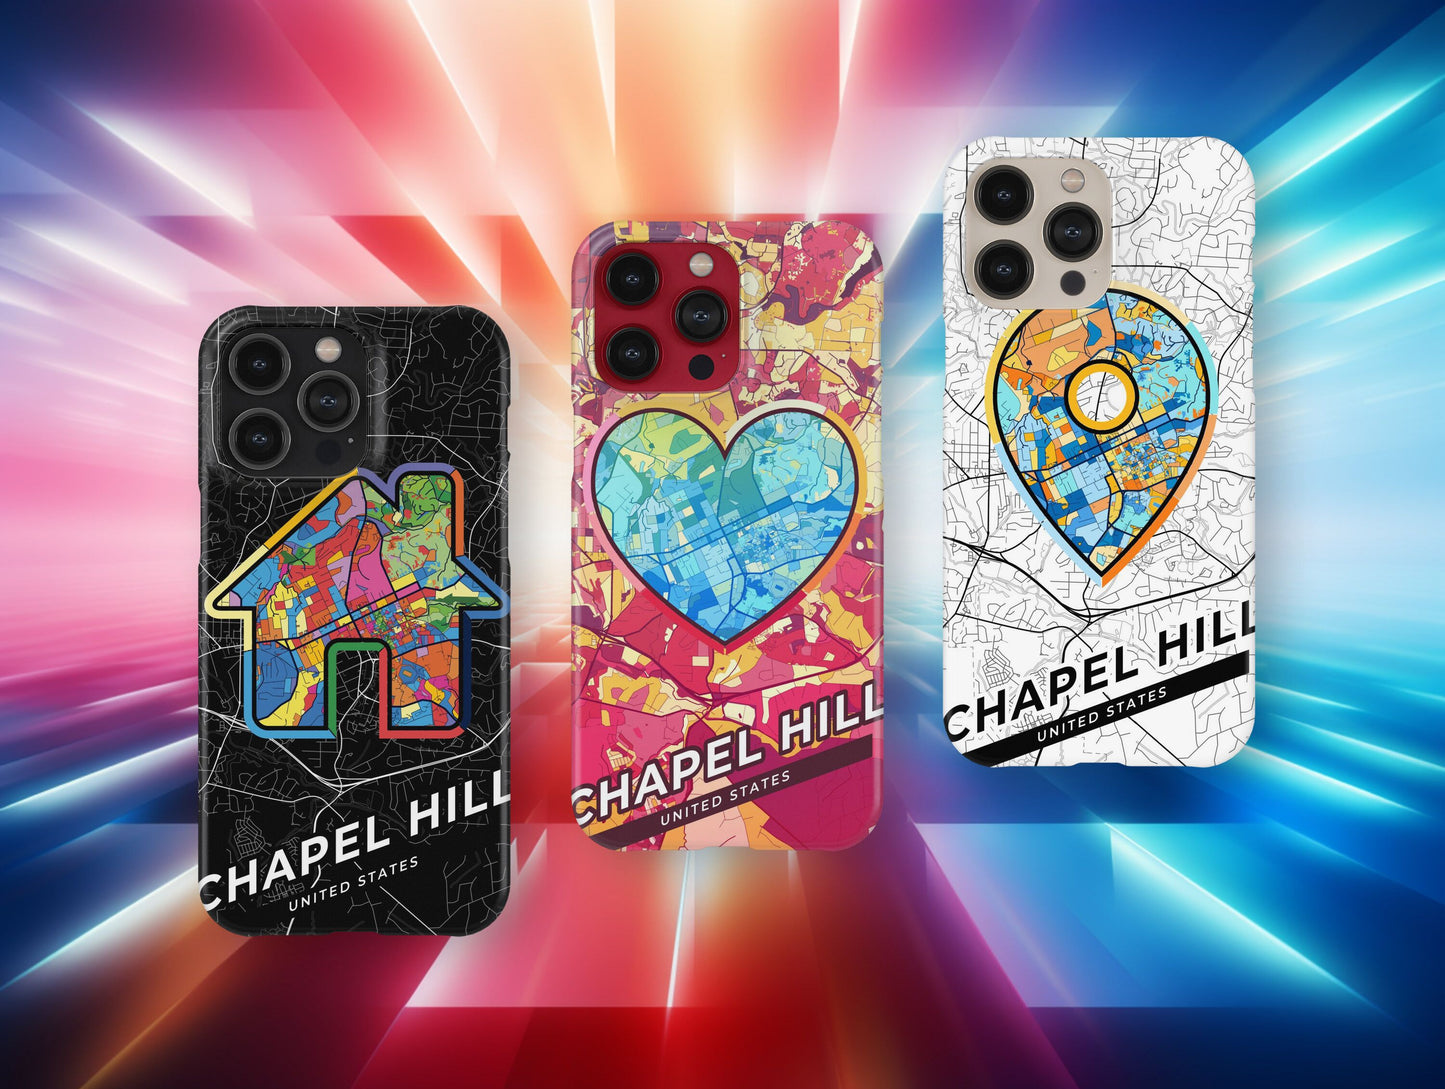 Chapel Hill North Carolina slim phone case with colorful icon. Birthday, wedding or housewarming gift. Couple match cases.